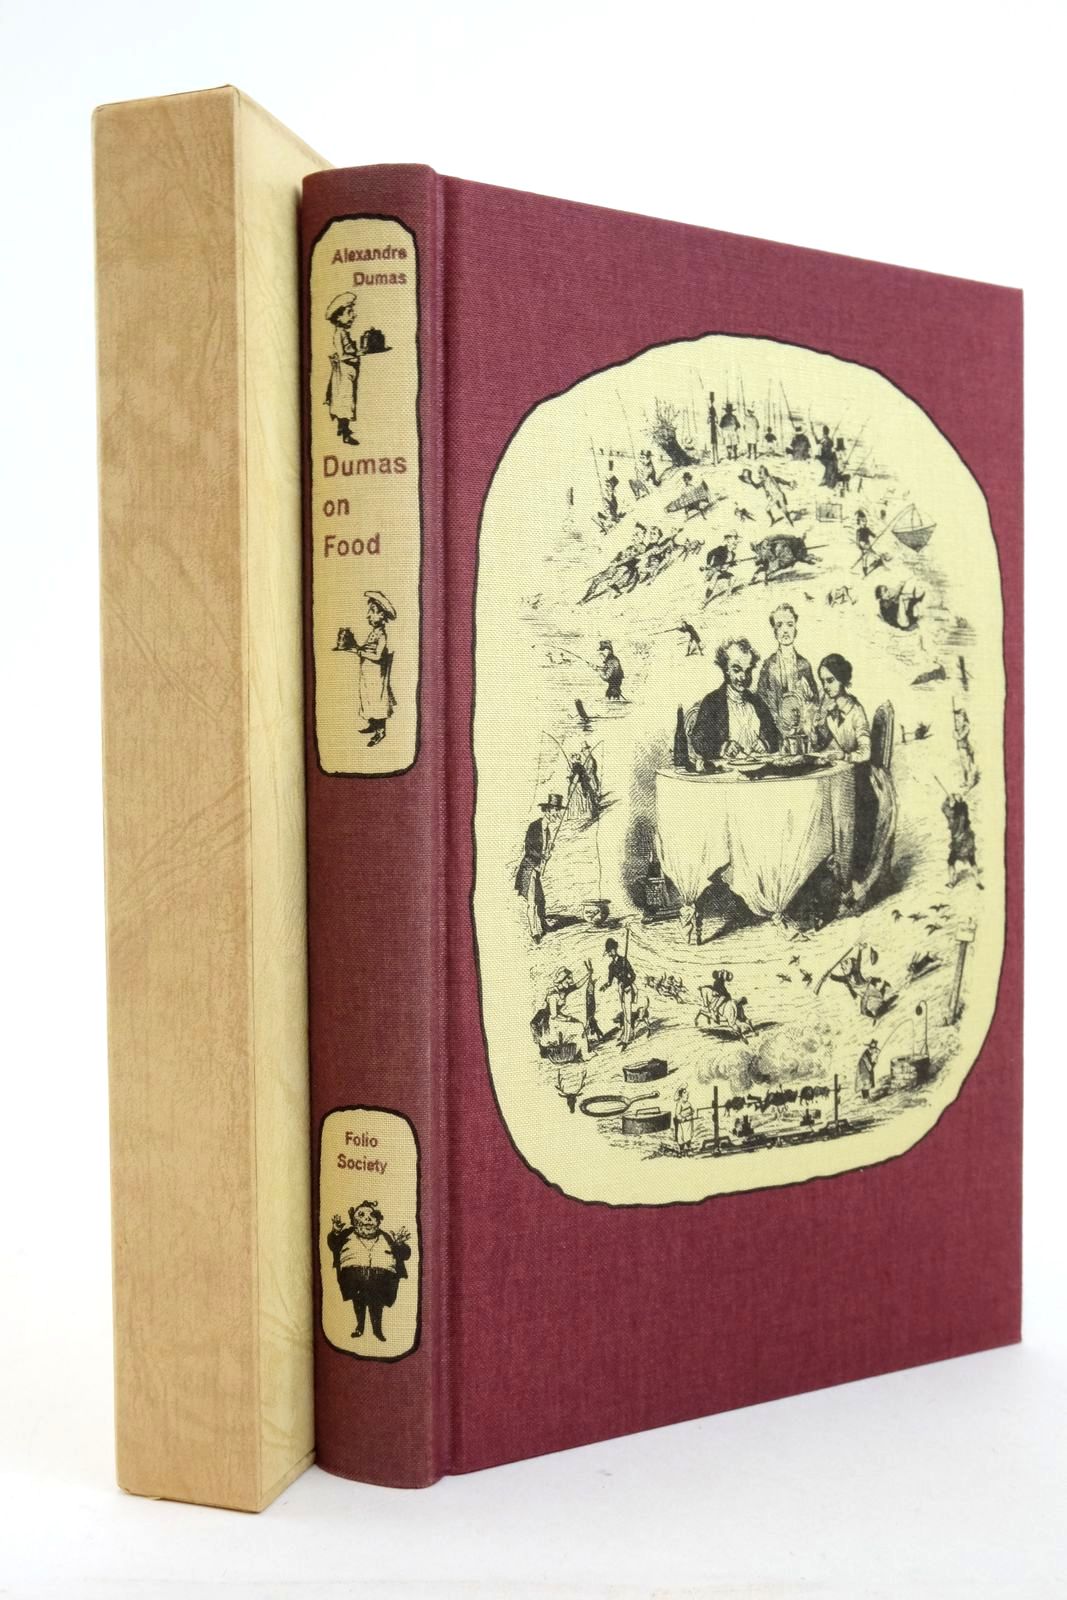 Photo of DUMAS ON FOOD written by Dumas, Alexandre published by Folio Society (STOCK CODE: 2138375)  for sale by Stella & Rose's Books